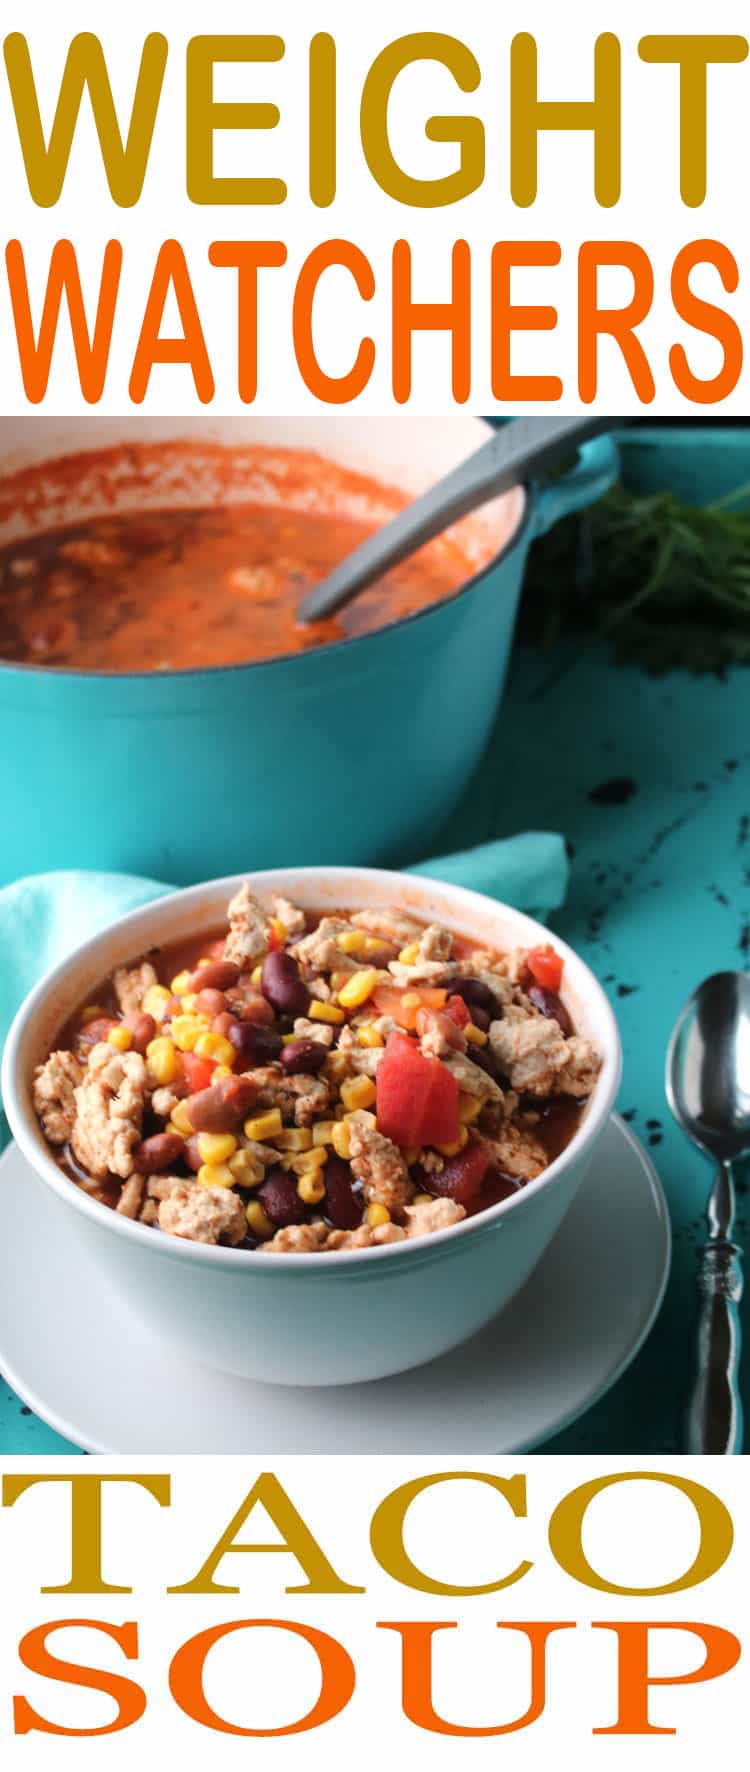 Weight Watchers Taco Soup | Just 3 Points! | All She Cooks